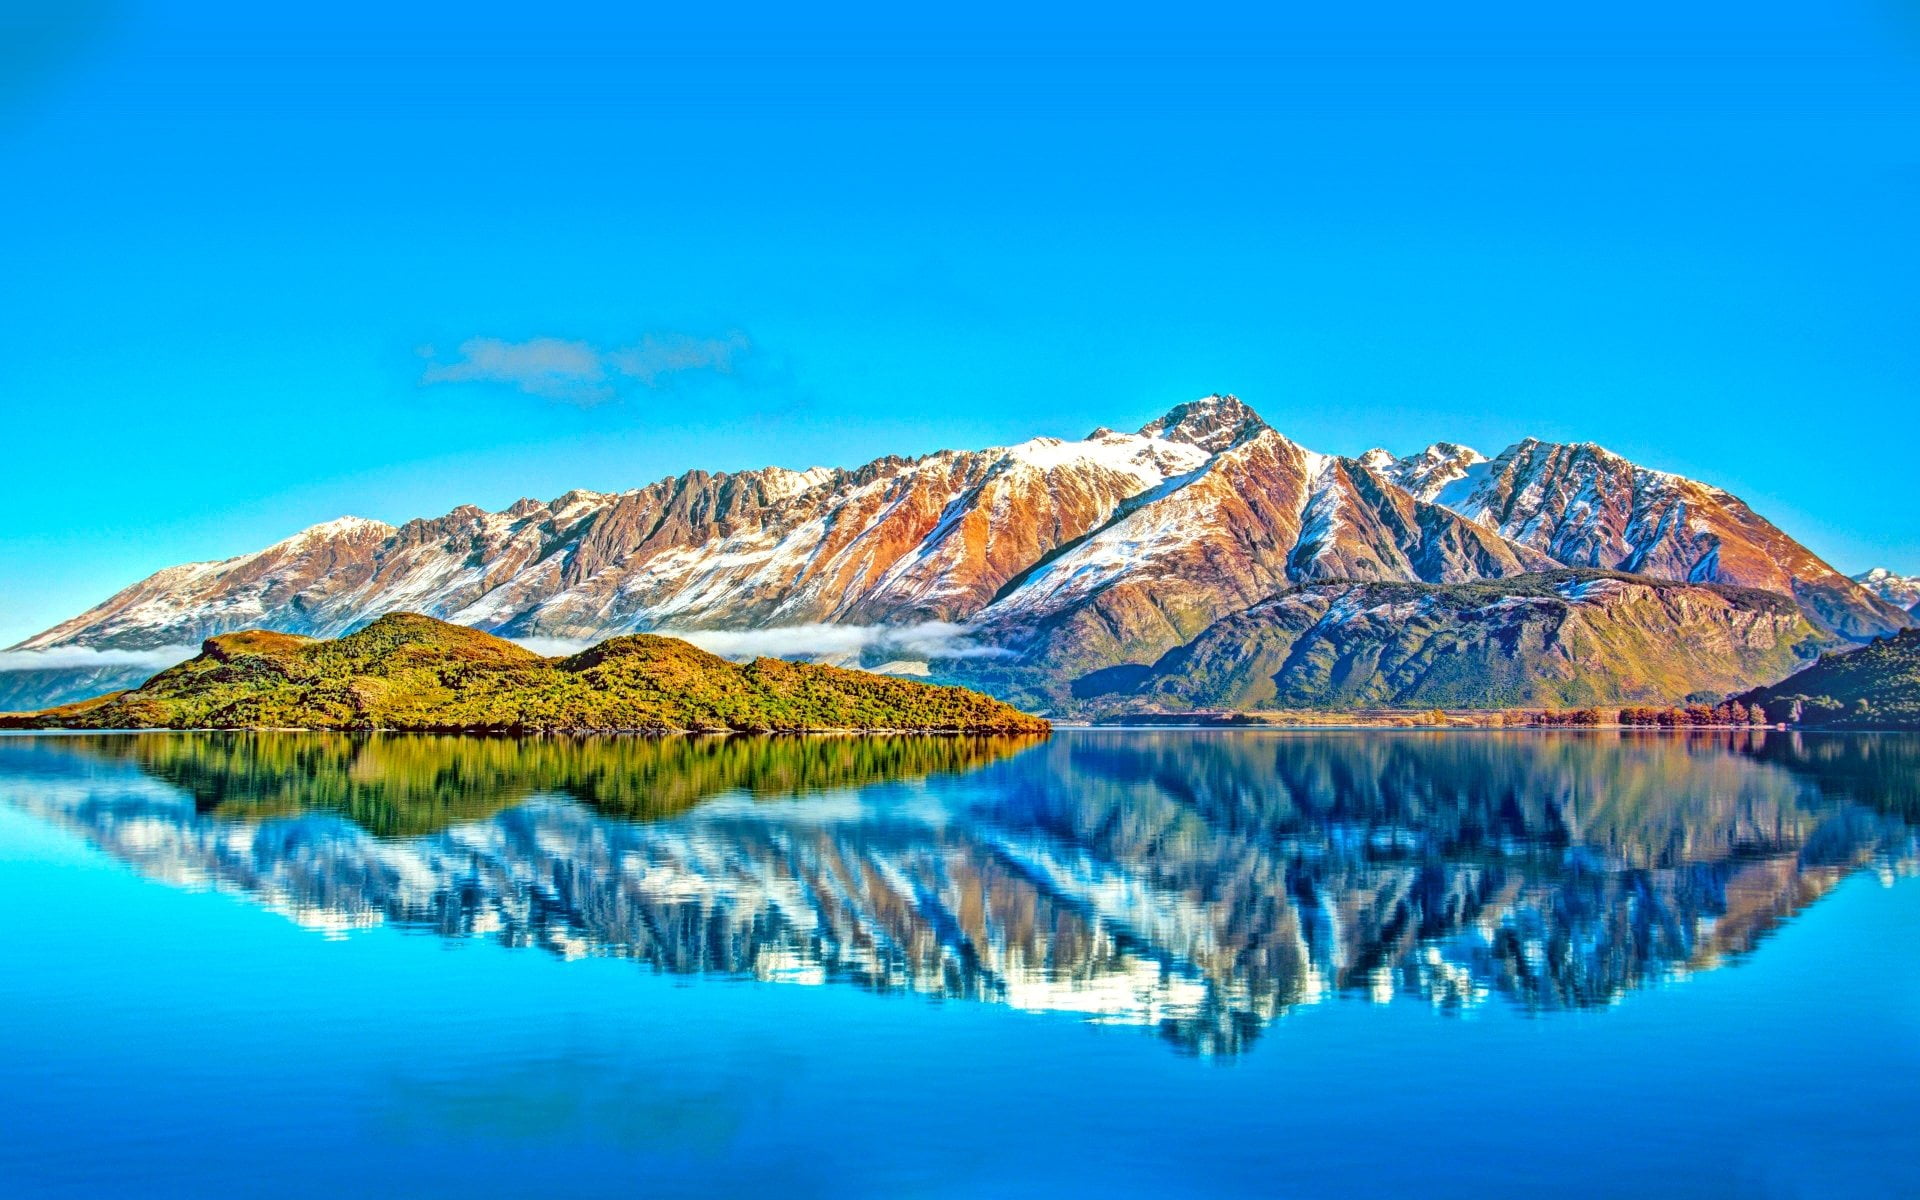 brown and white mountain, Earth, Scenic, Azure, Lake, Reflection